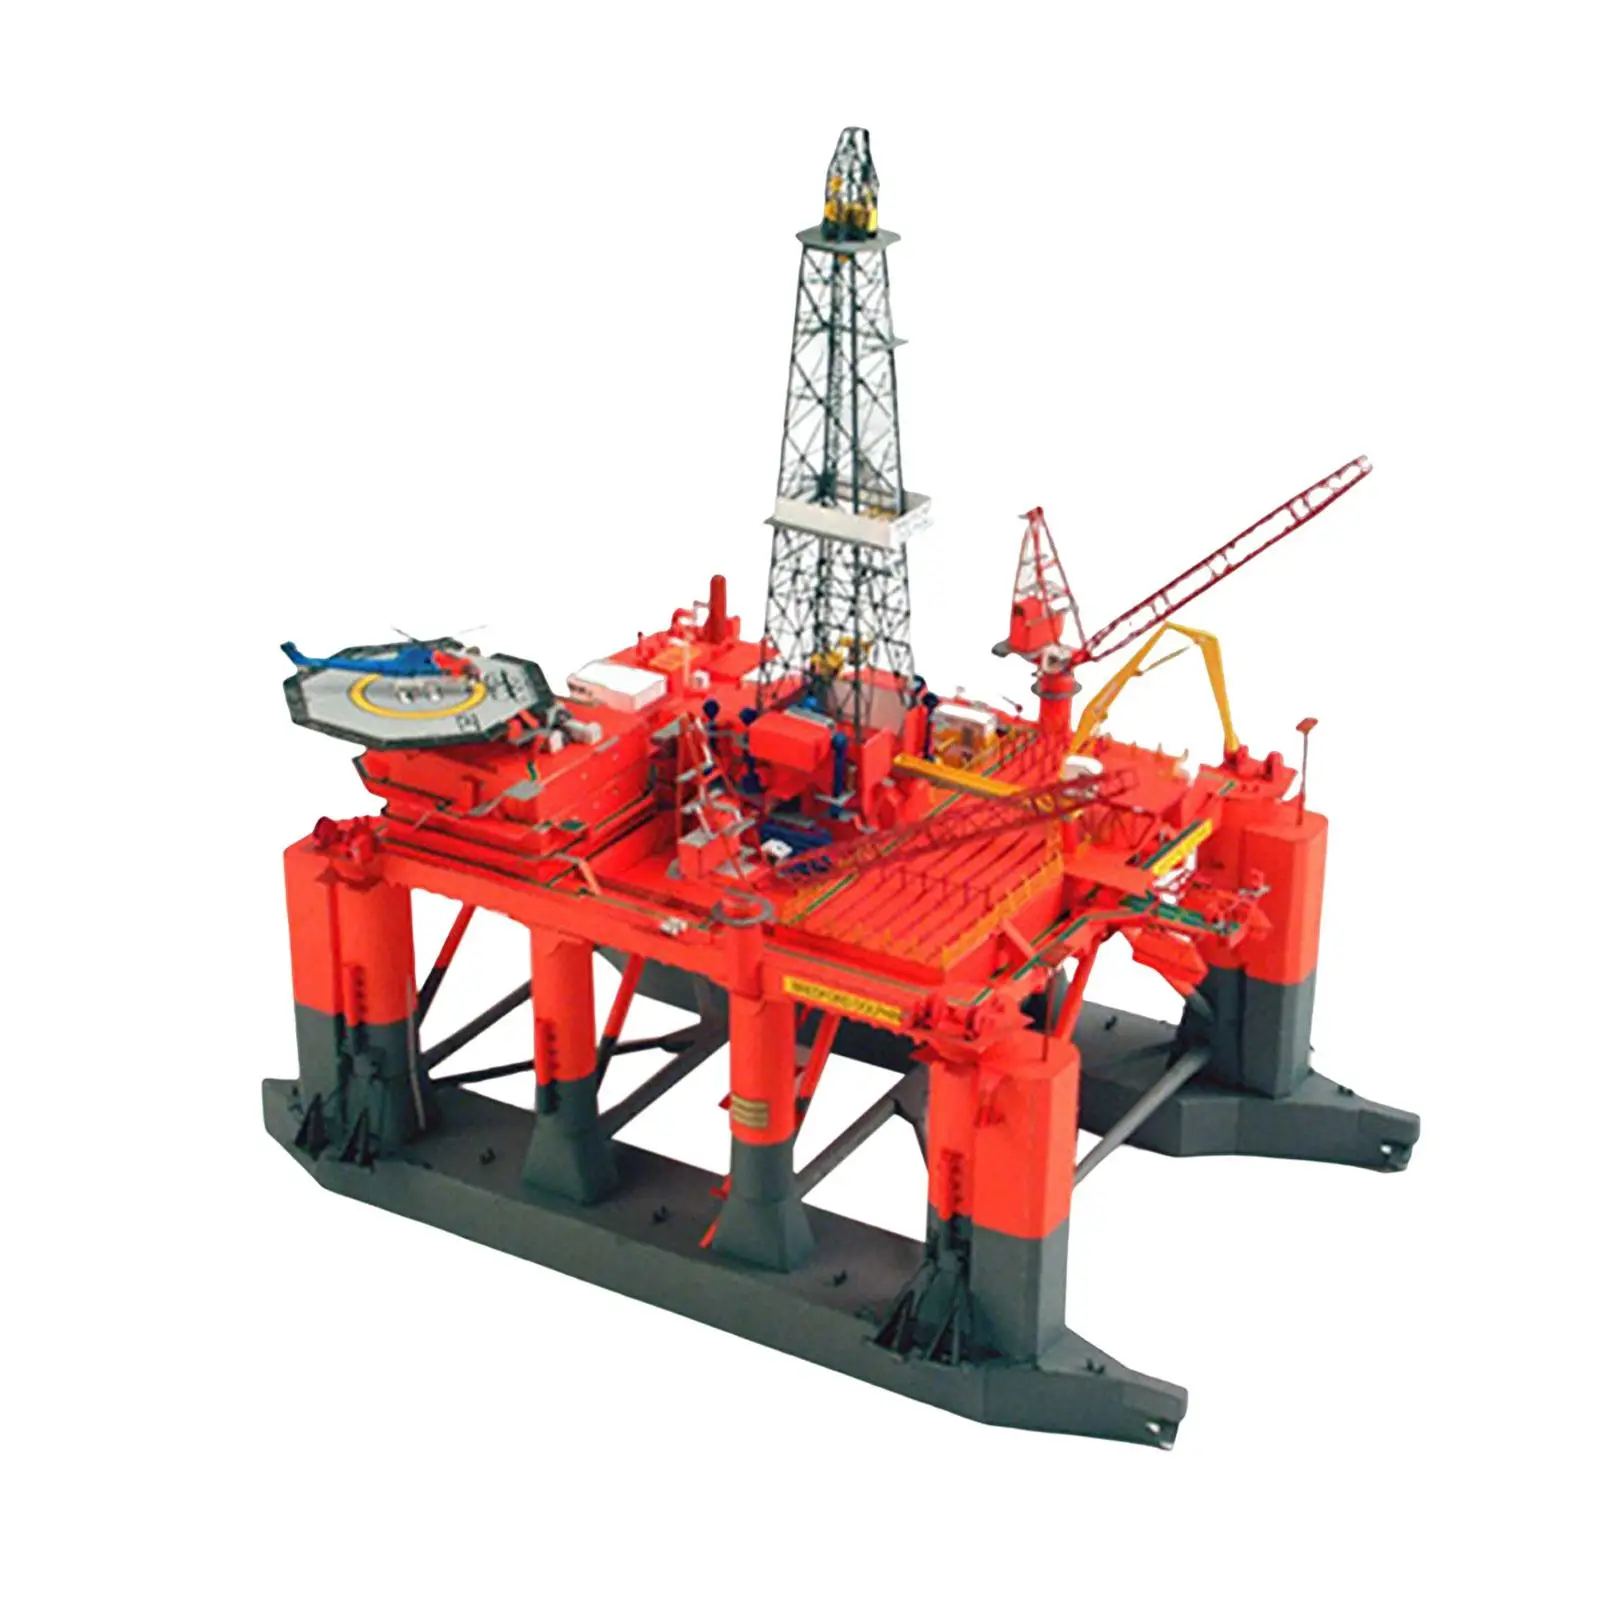 3D 1:400 DIY Semi Submersible Oil Drilling Platform Model Paper Arts Ornaments Accessories Included Home Office Decoration Gift